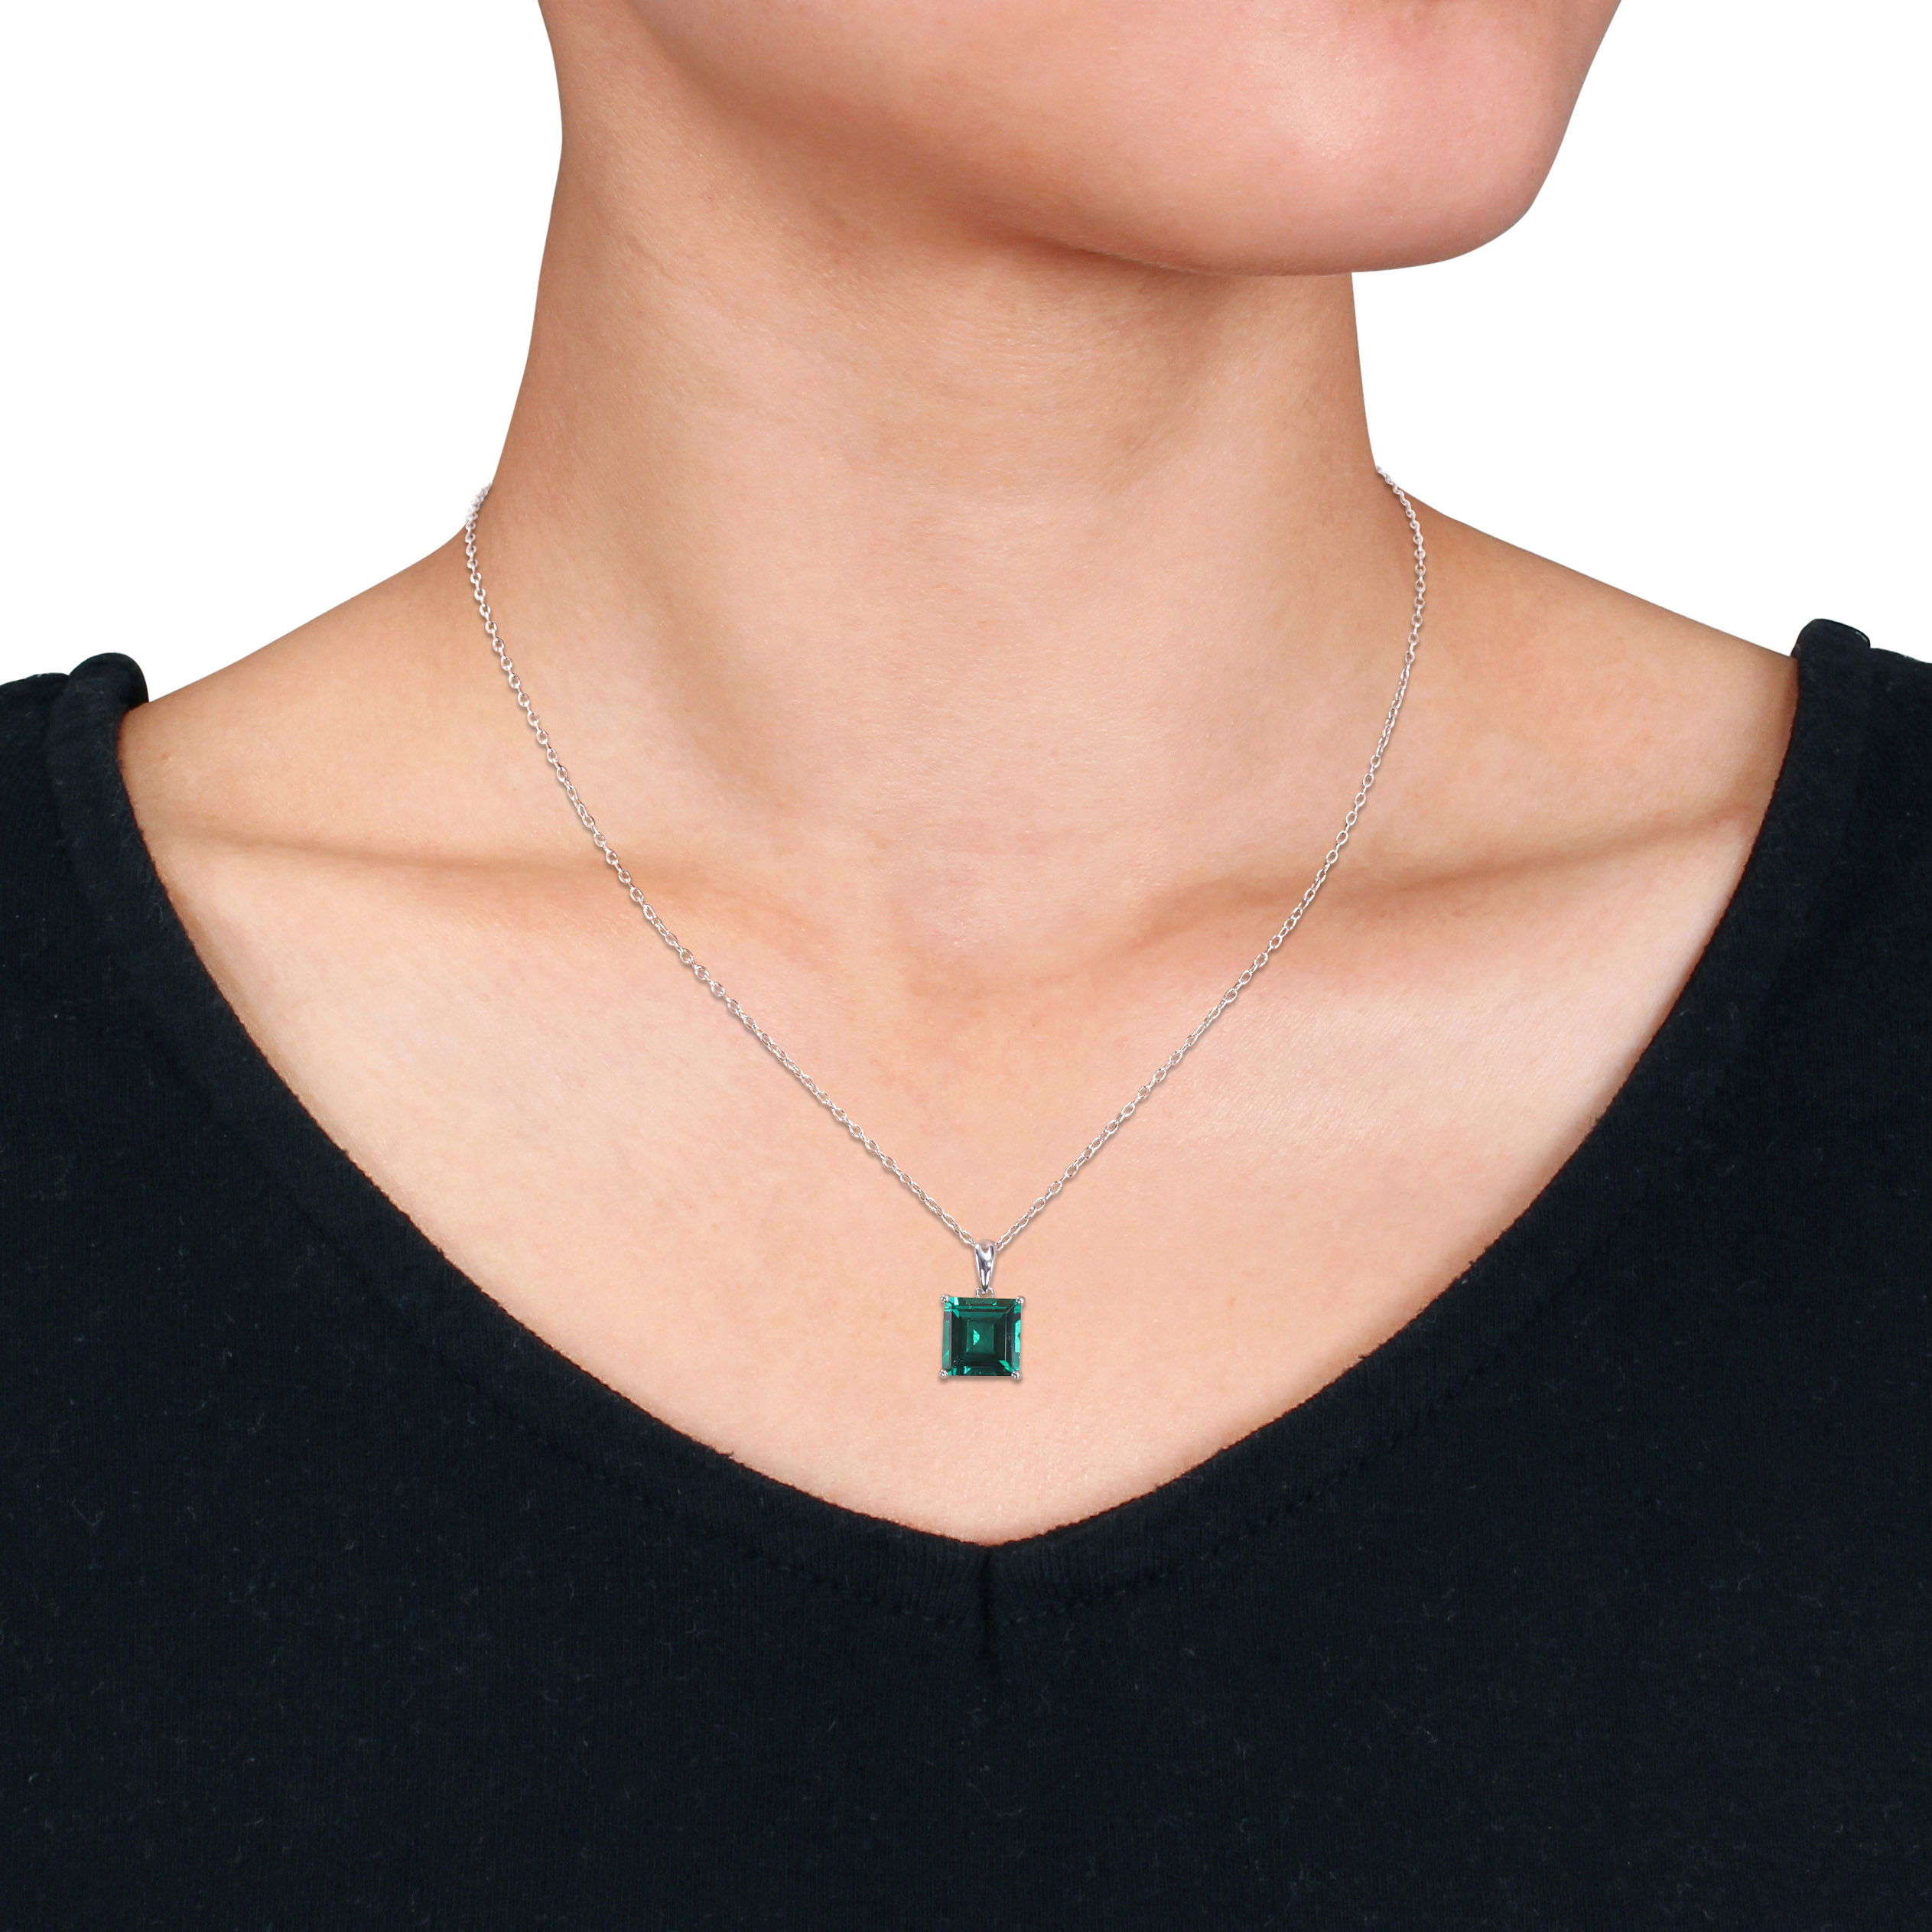 2 5/8 CT TGW Princess Cut Created Emerald Solitaire Heart Design Pendant with Chain in Sterling Silver - 18 in.